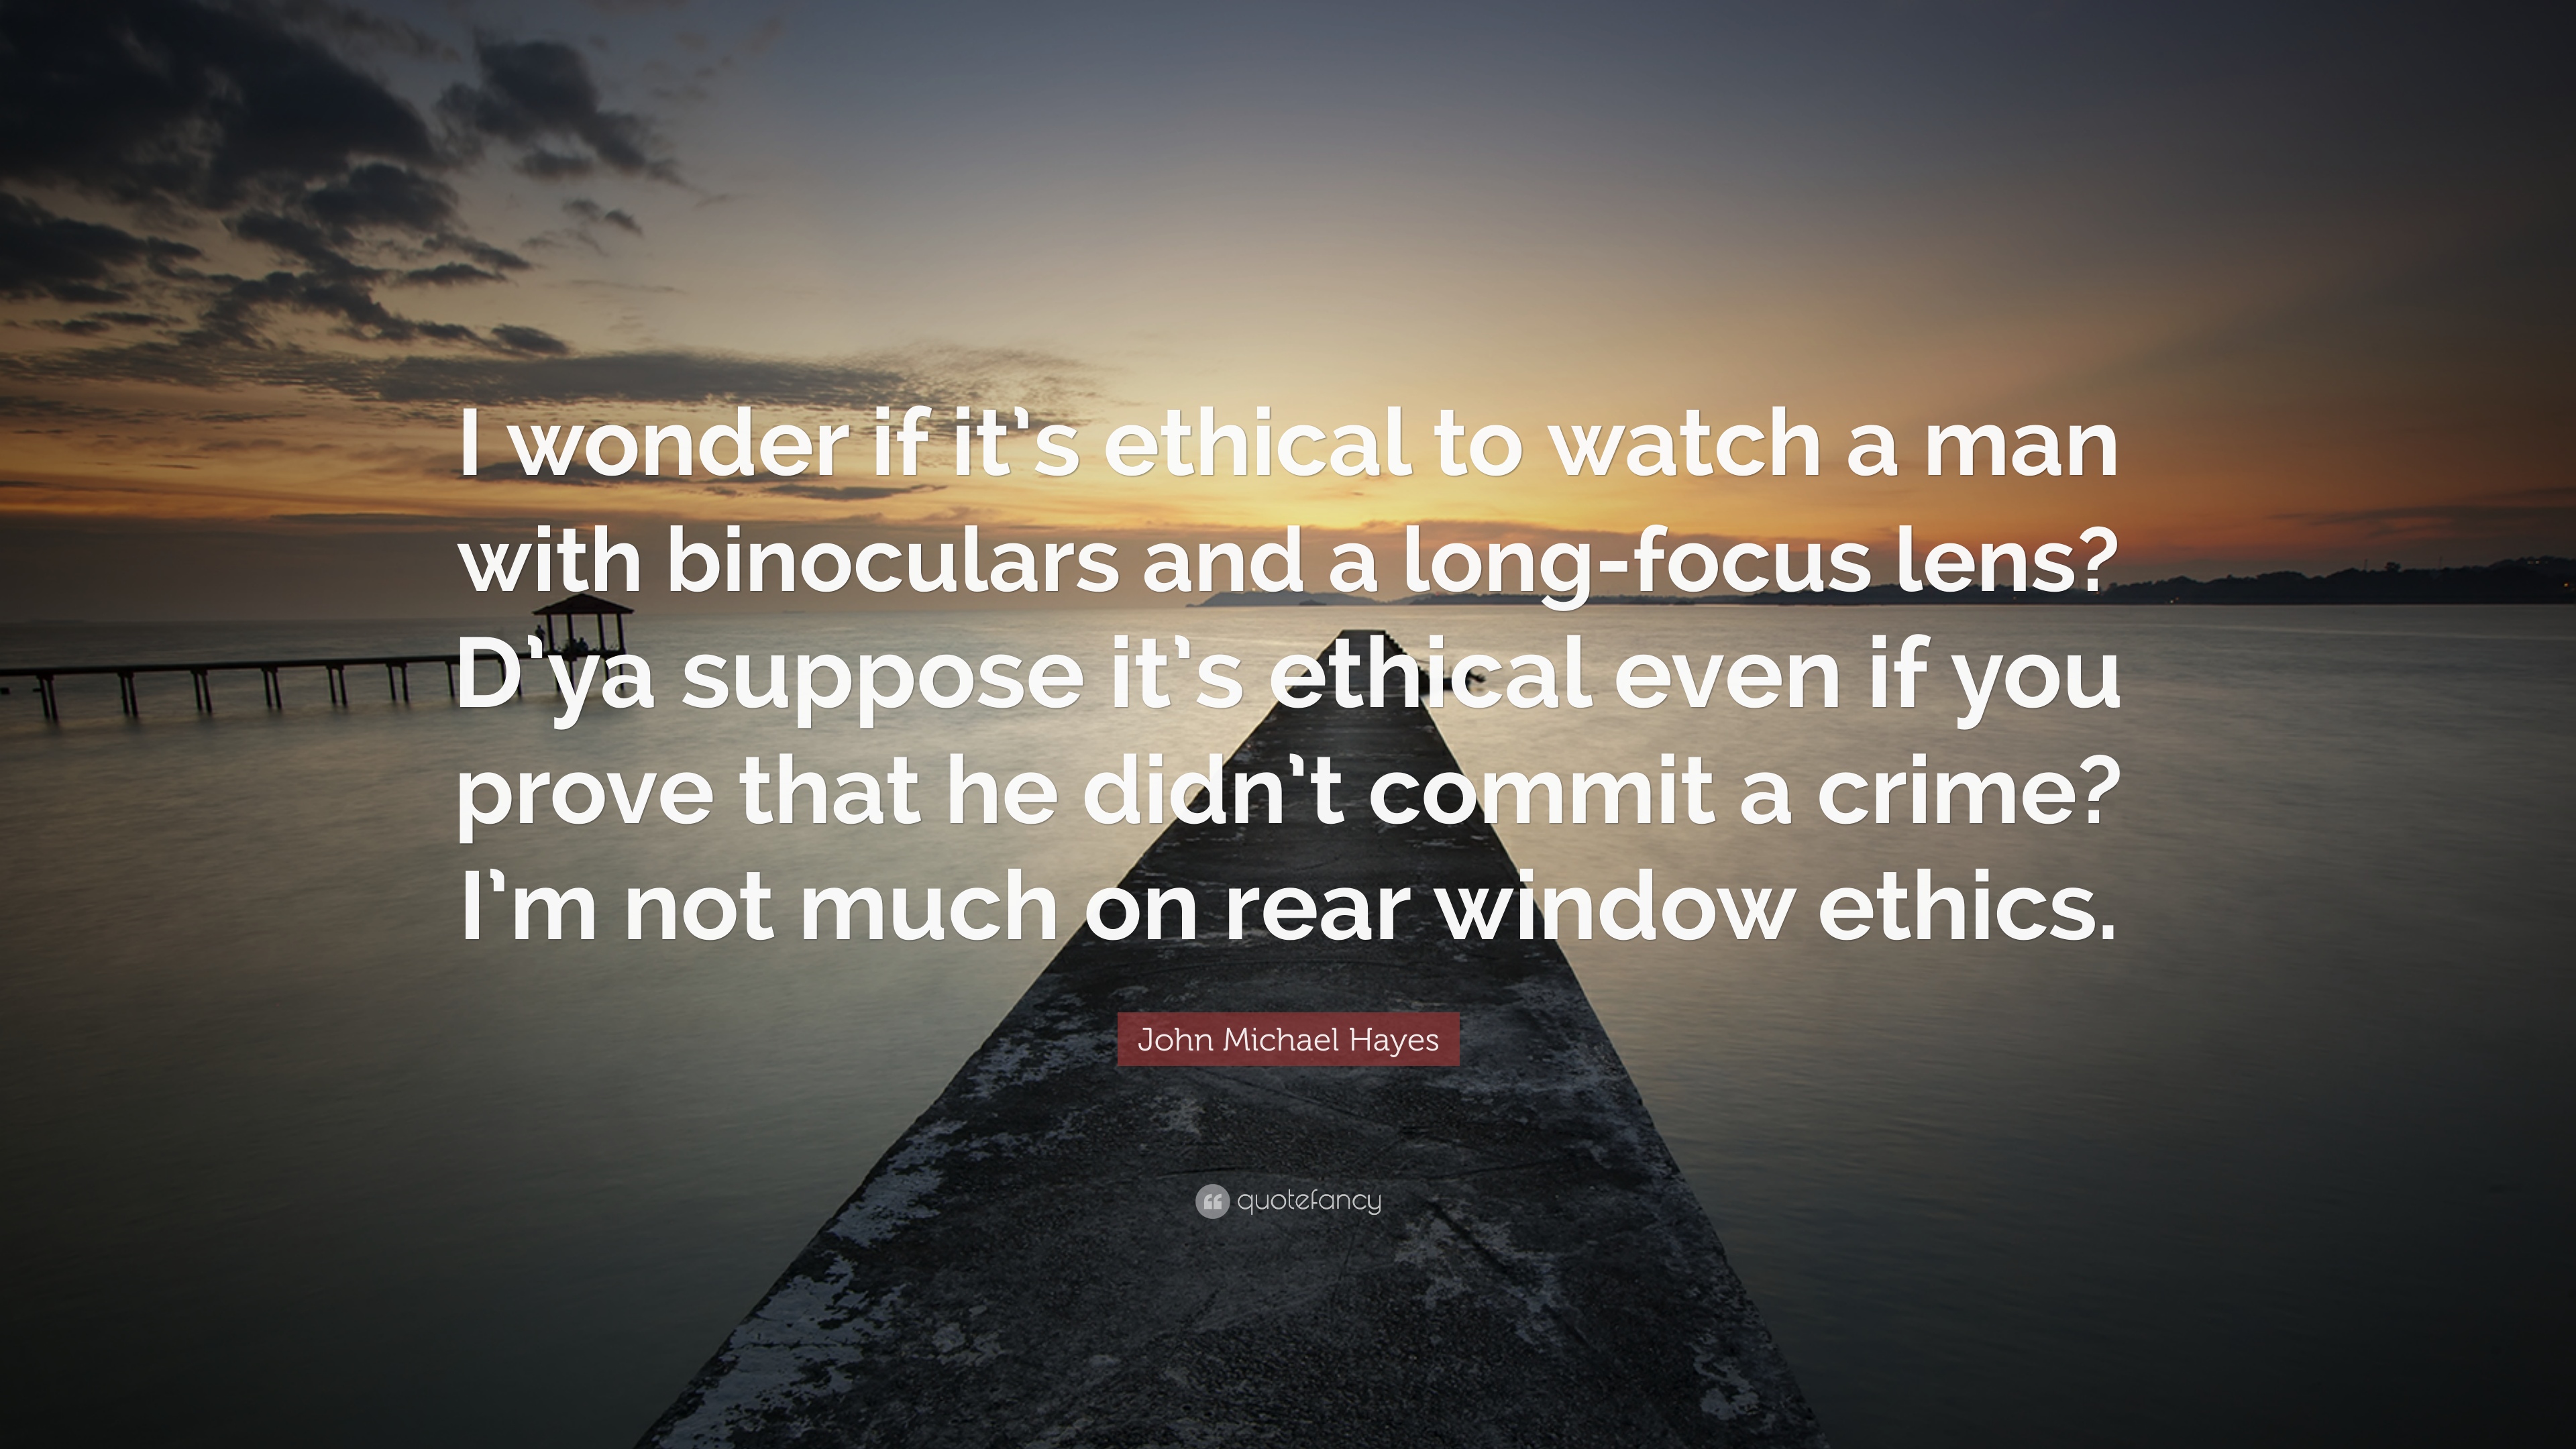 John Michael Hayes Quote: “I wonder if it's ethical to watch a man